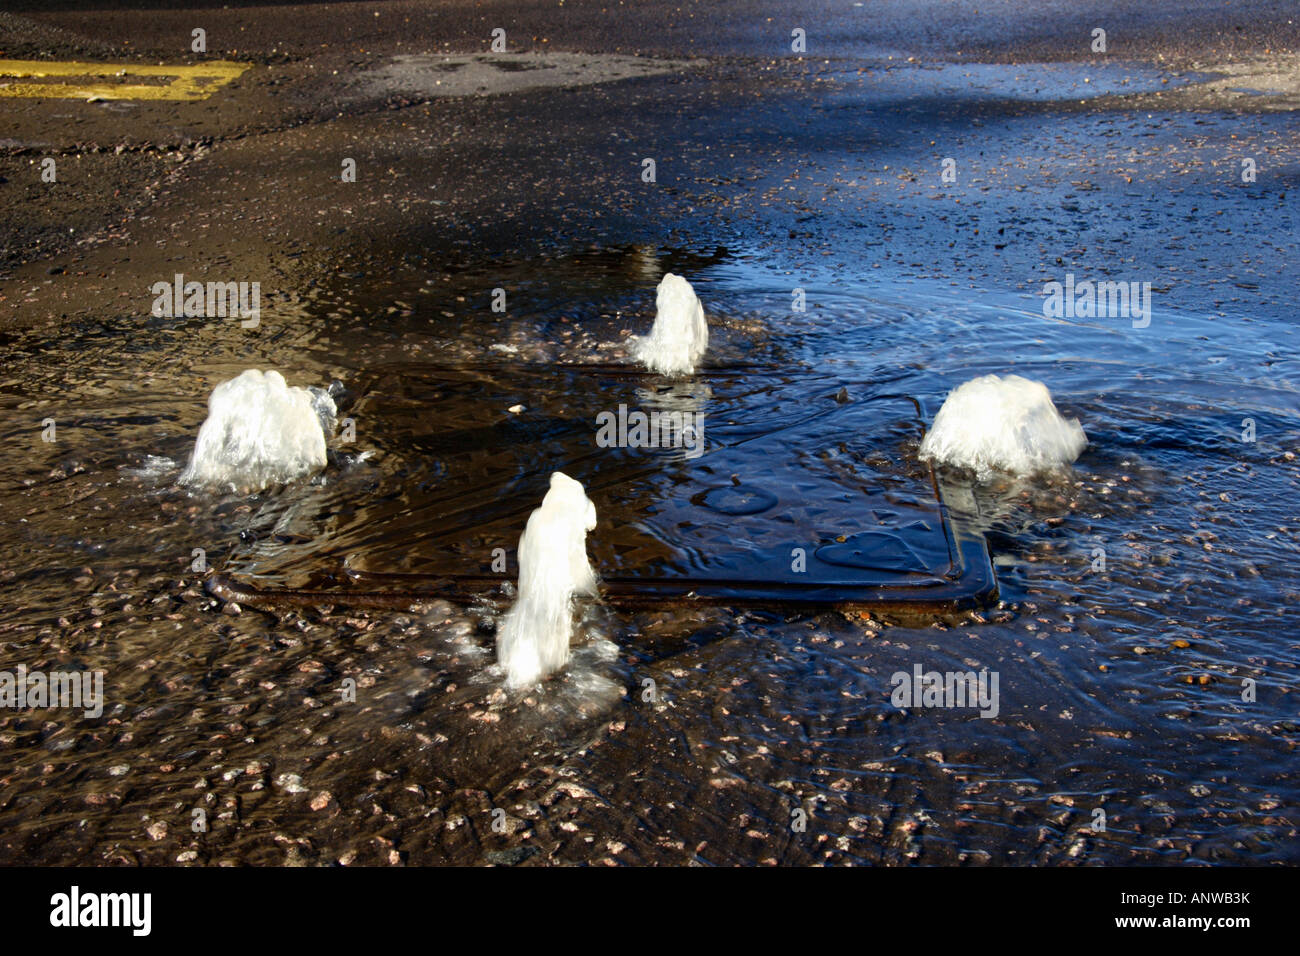 Water squirting up out of a road drain. Stock Photo